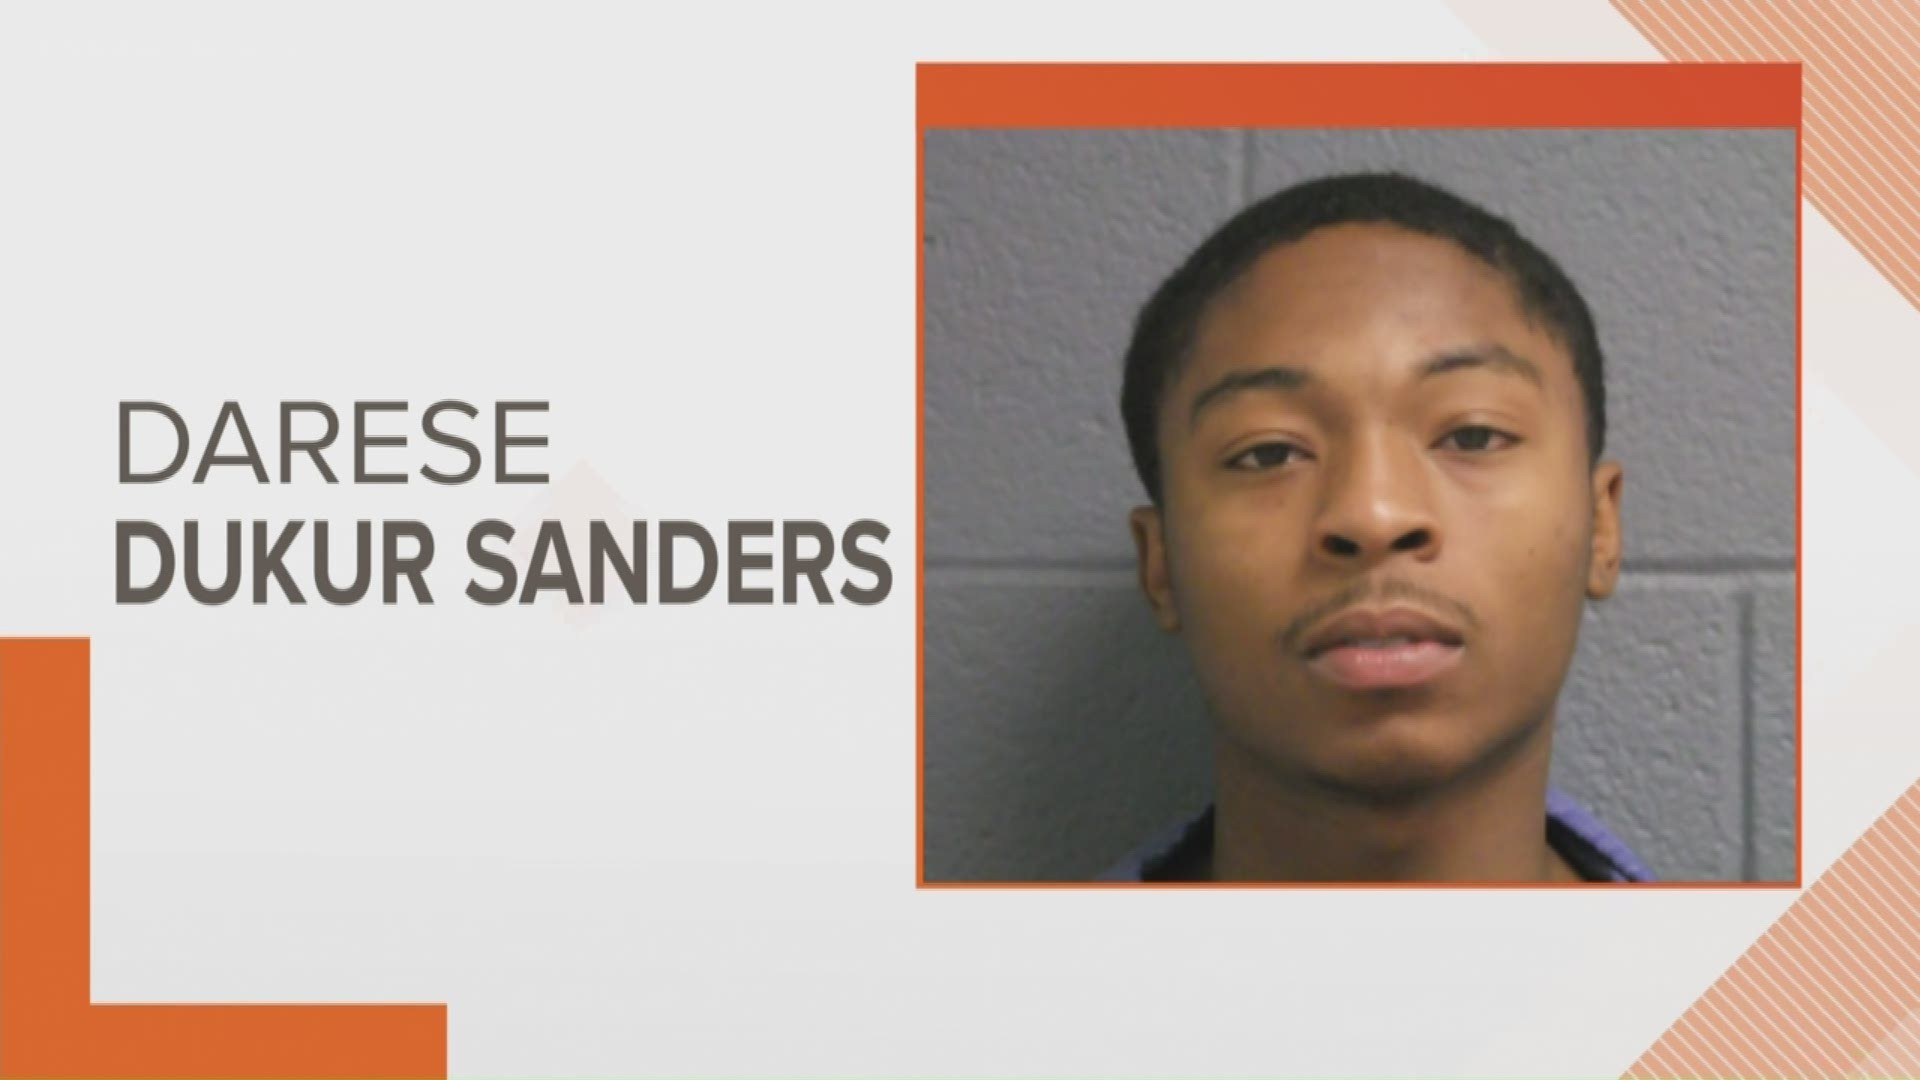 Authorities are searching for Darese Dukur Sanders, who is charged with open murder.